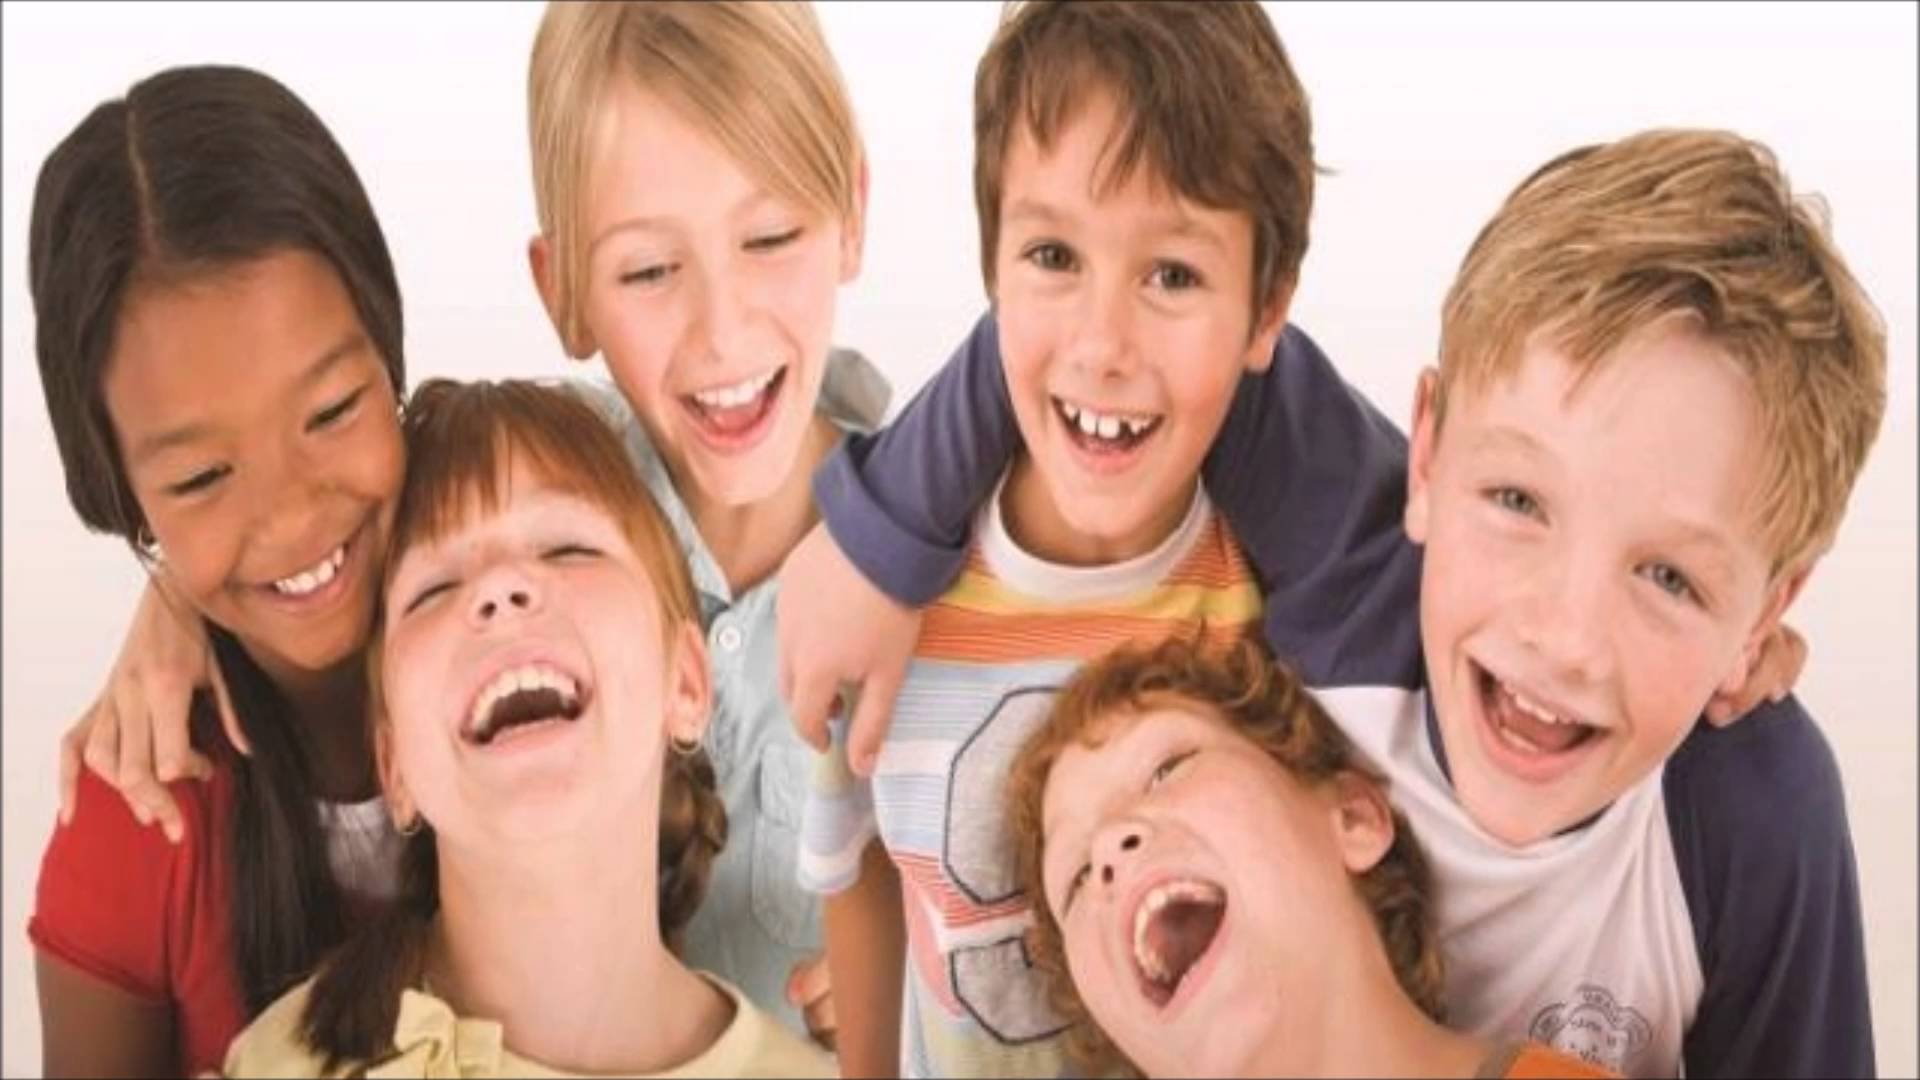 kids Giggling And Laughing Sound Effect - YouTube